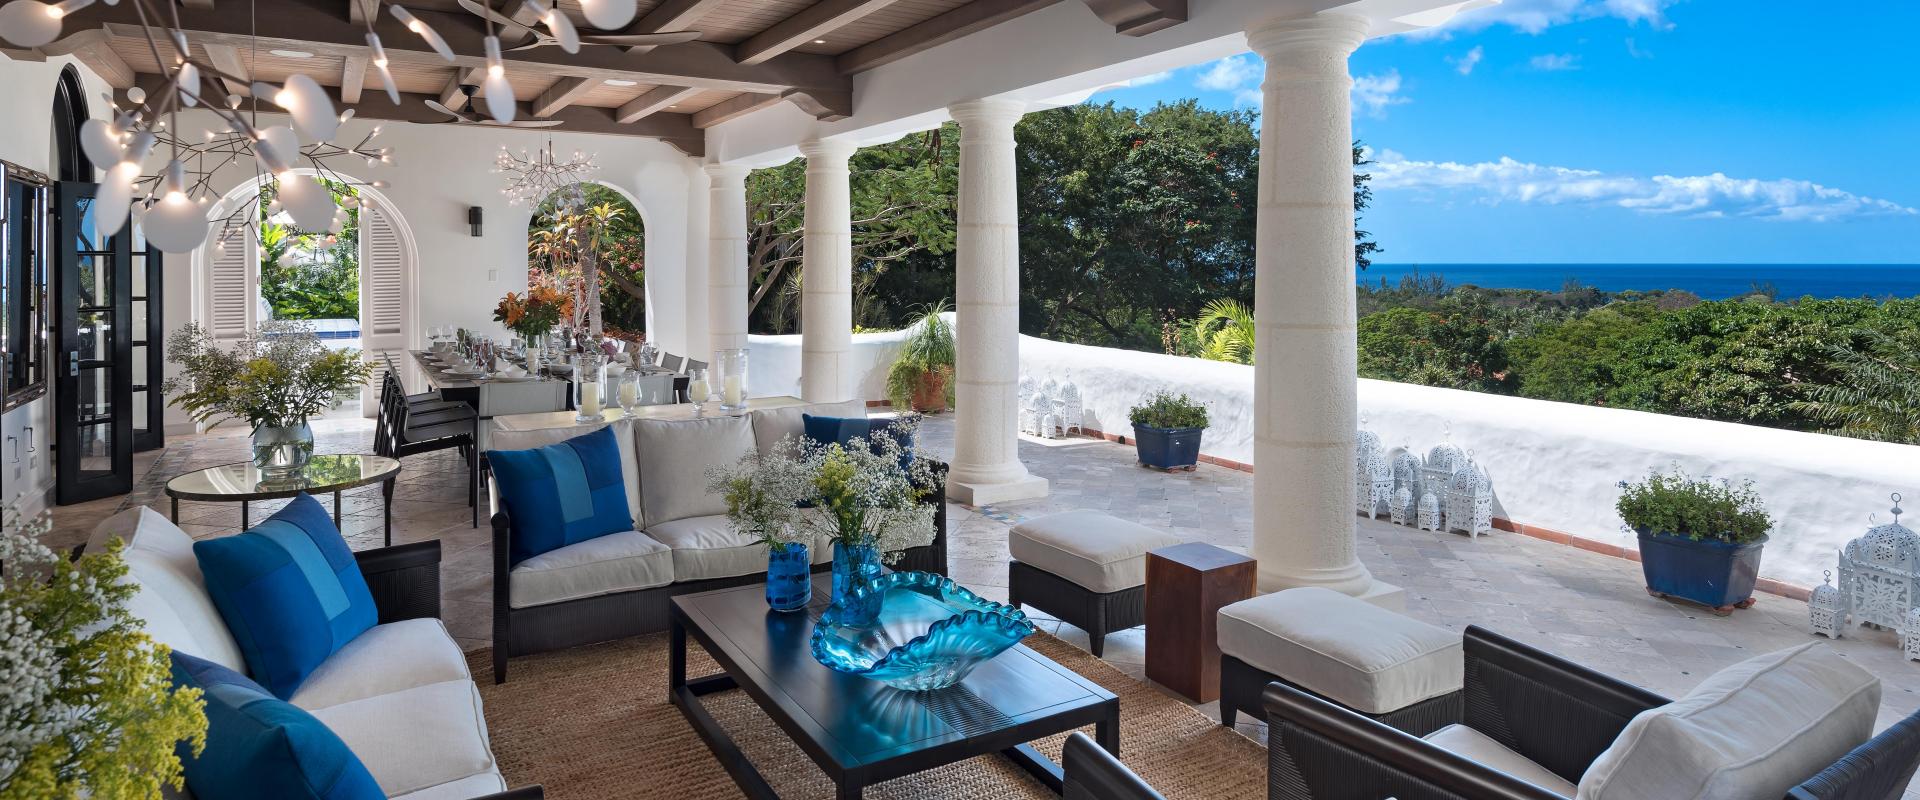 Covered Patio and Lounge with Ocean Views Elsewhere 10 Bedroom Sandy Lane Villa For Rent In Barbados